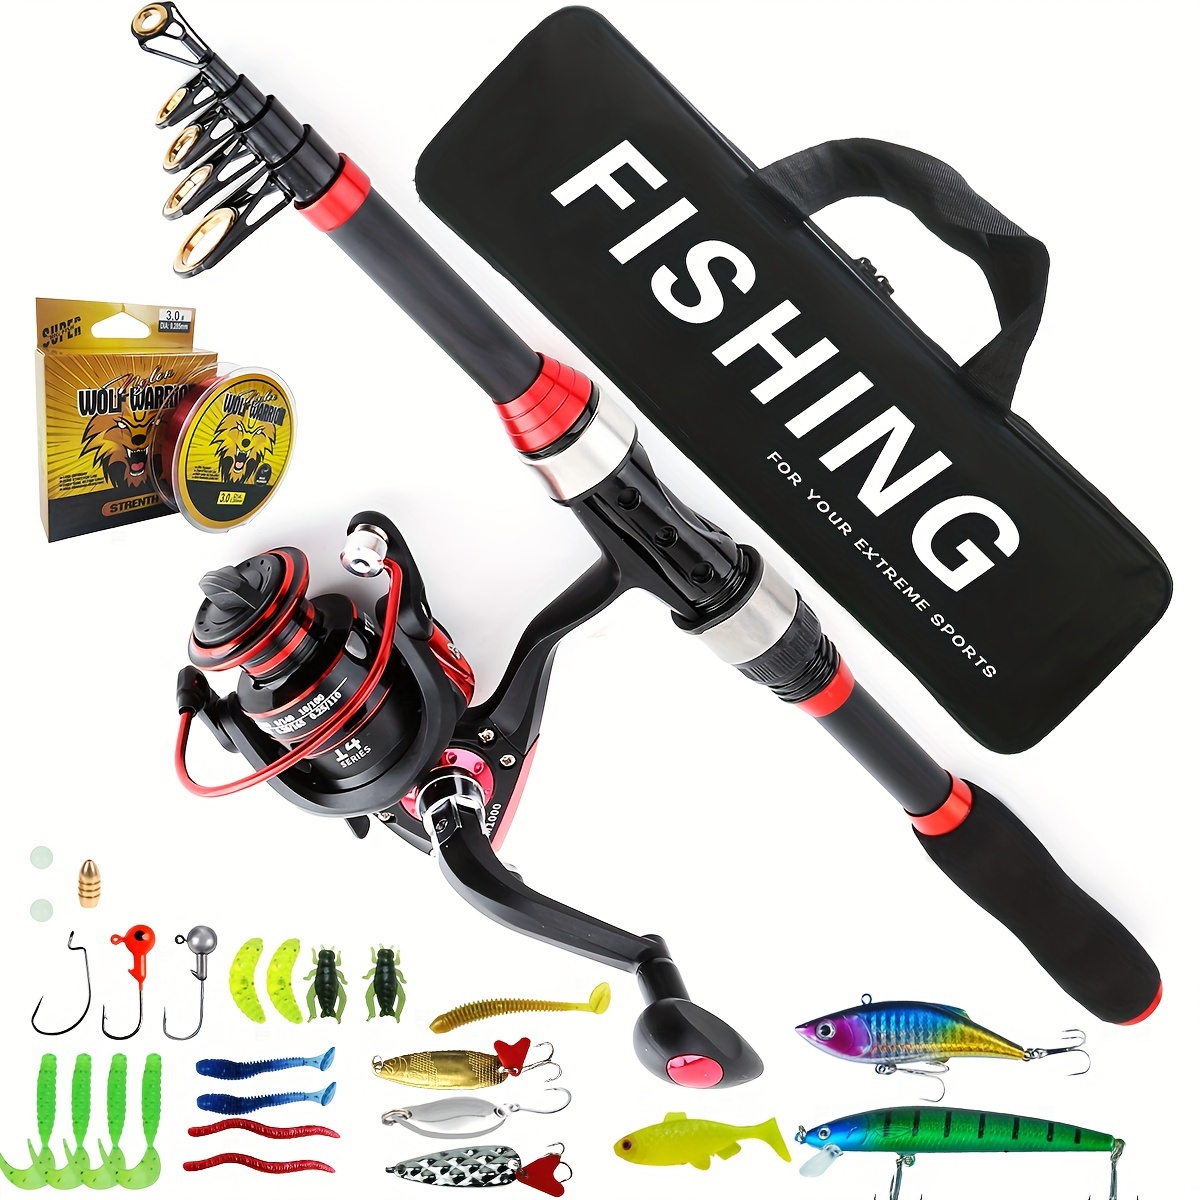 Portable Fishing Accessories Kit Set - Includes Tackle Box,  Saltwater/Freshwater Fish Hooks, Bait Parts - Perfect for Travel and  Outdoor Fishing